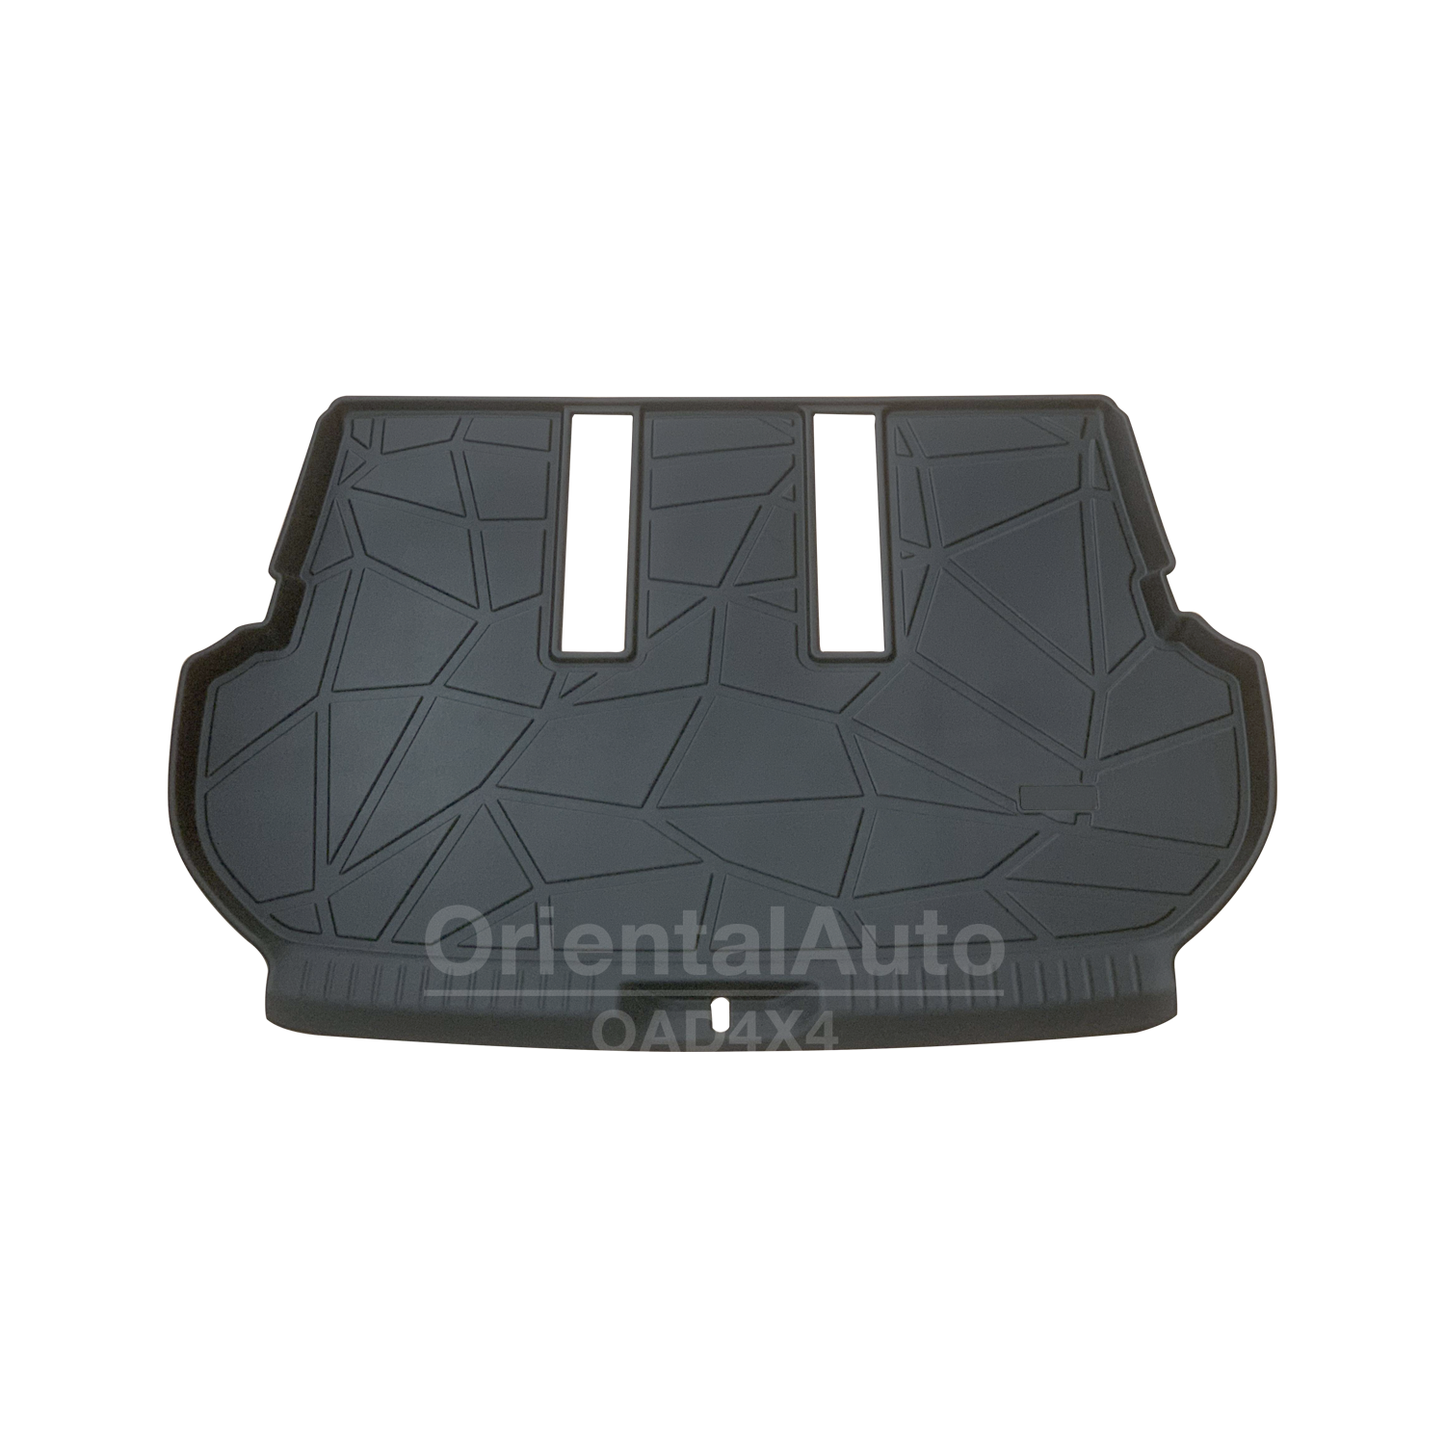 3D TPE Boot Mat for Toyota Fortuner 2015-Onwards with Inner Rear Step Panel Covered Cargo Mat Trunk Mat Boot Liner